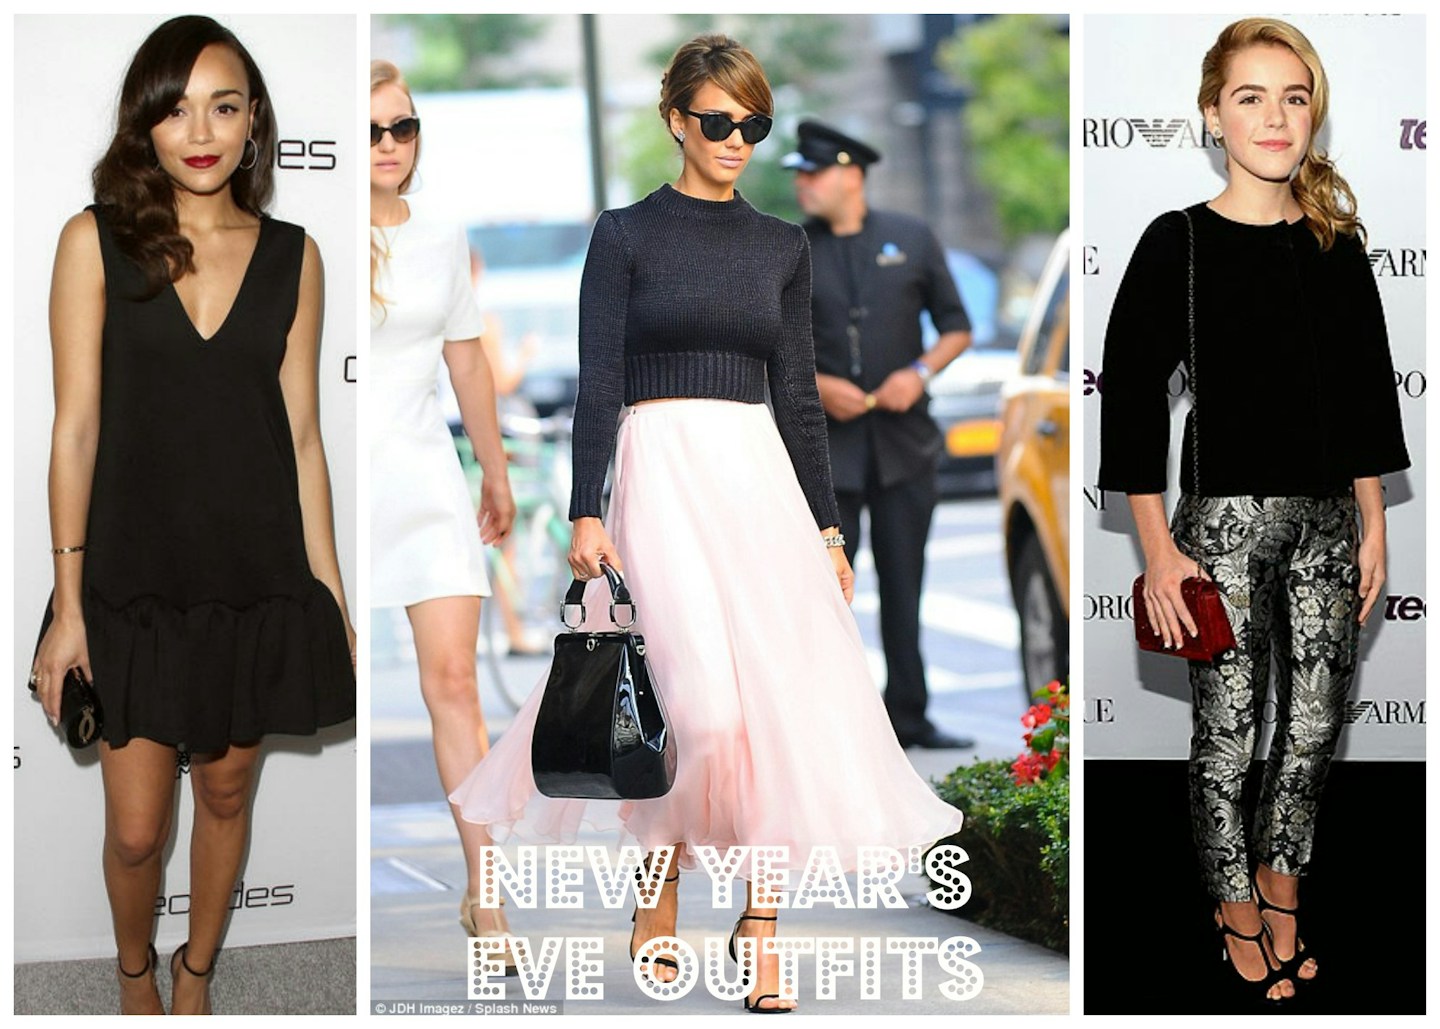 New Year’s Eve outfit ideas inspired by celebrities